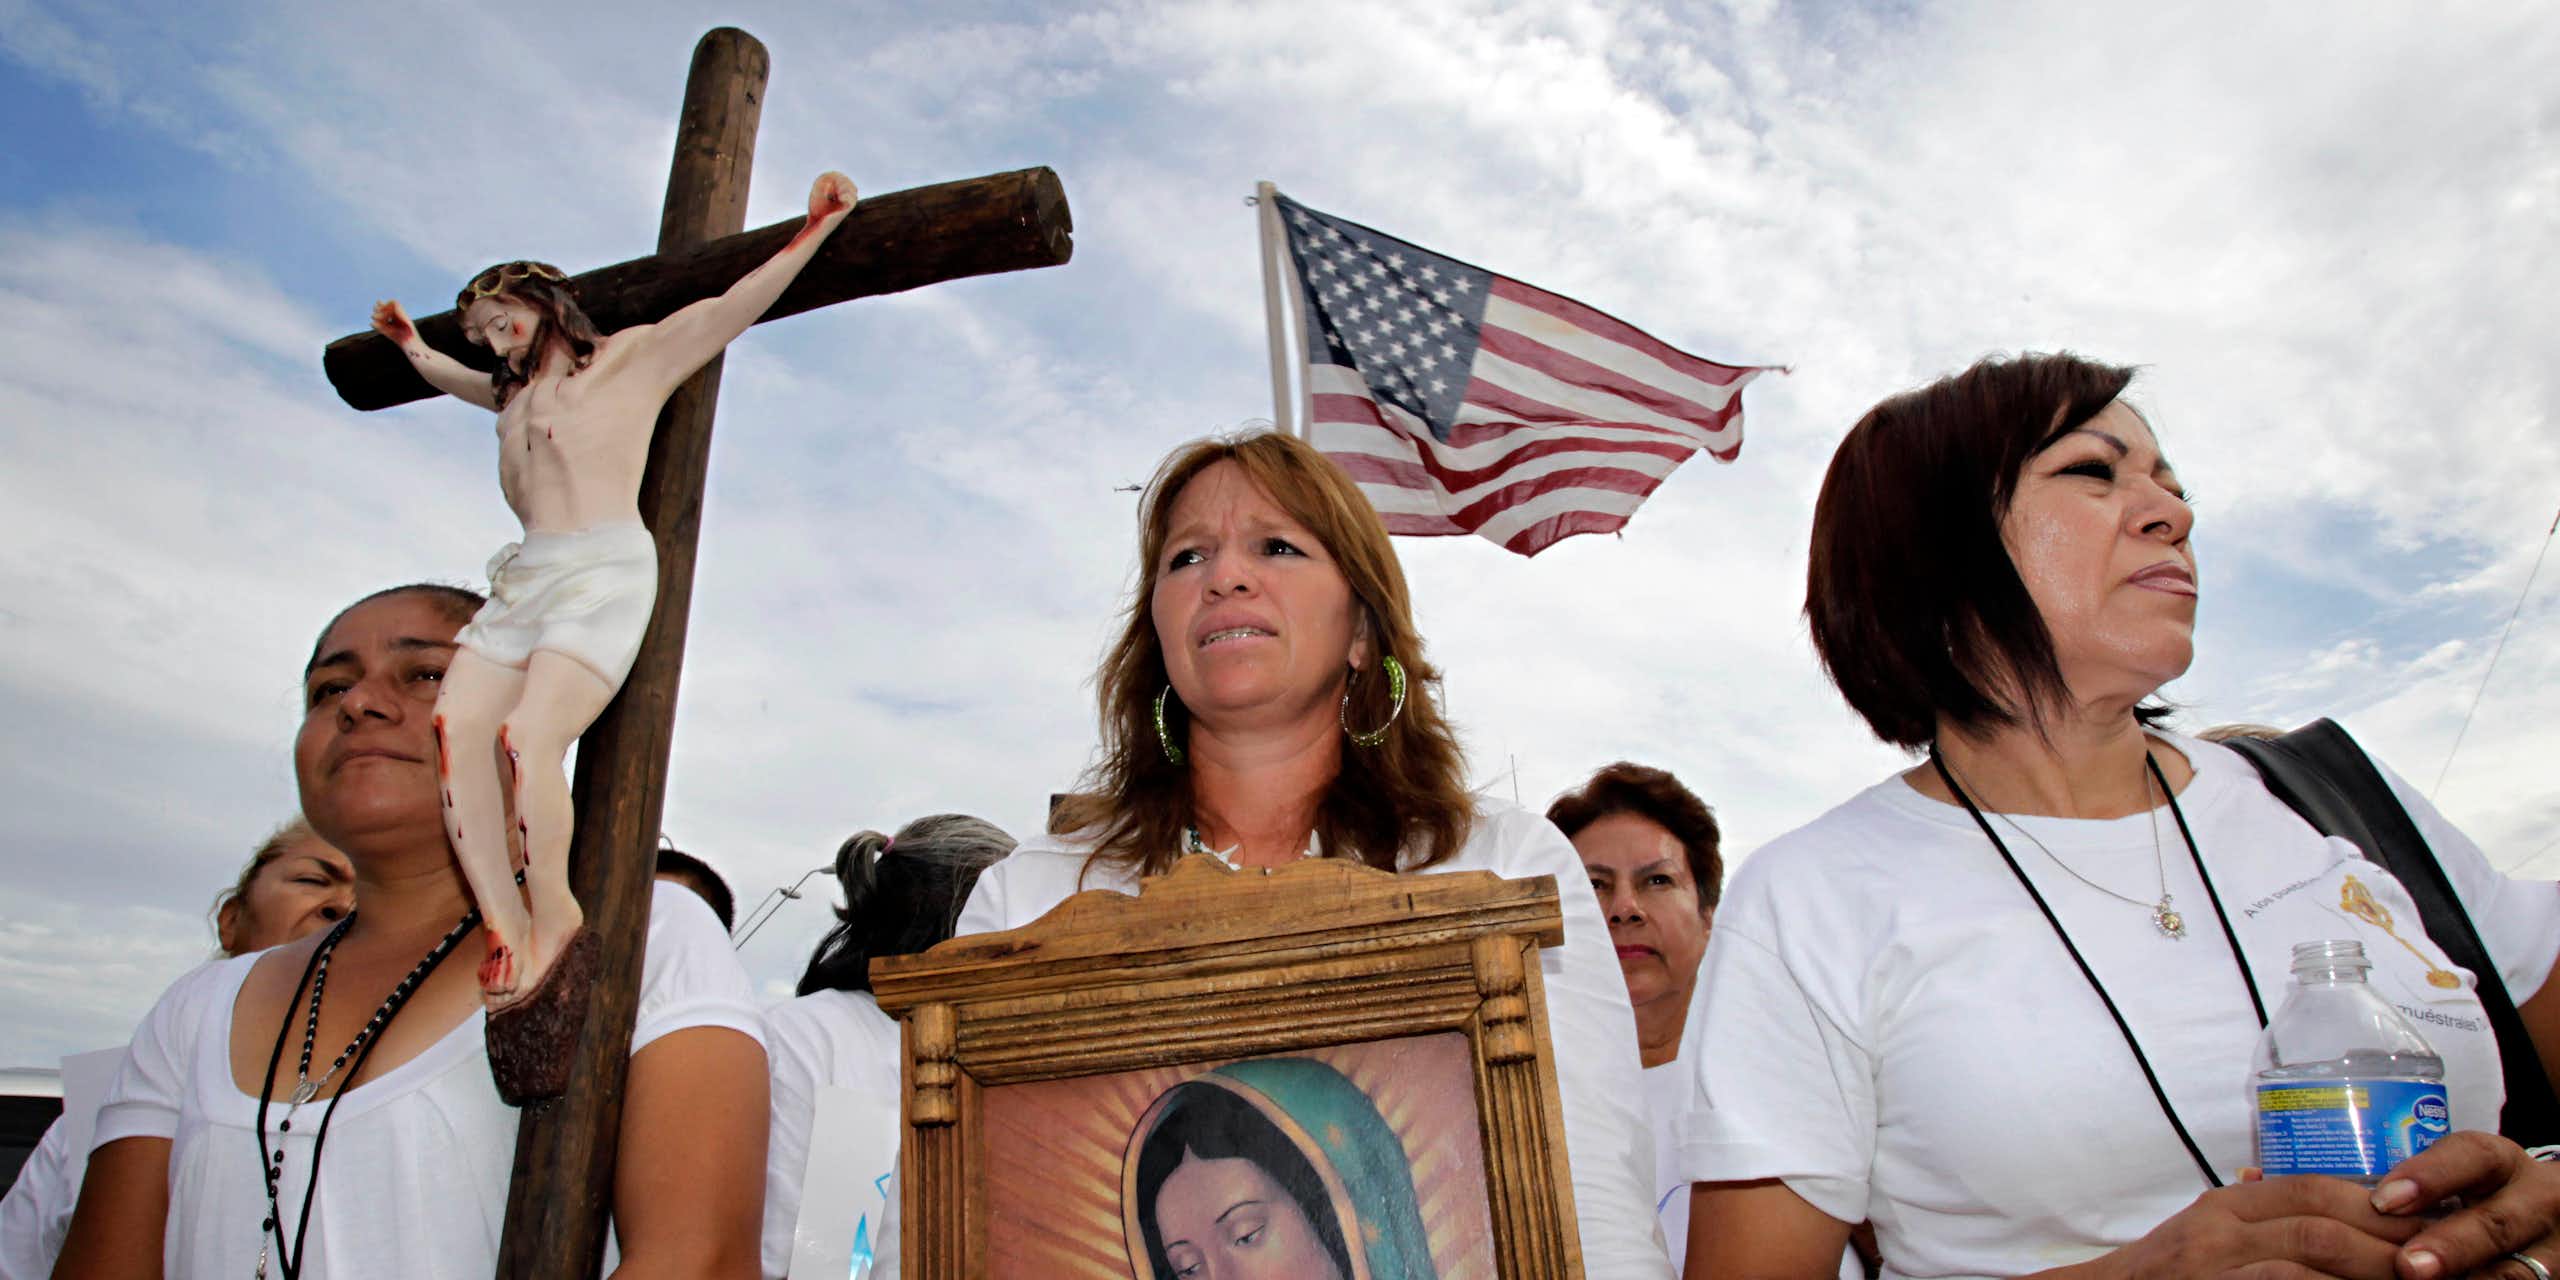 Three women stand ahead of a rally, with one holding a crucifix and another a portrait of Virgin Mary, while the American flag flutters in the back.